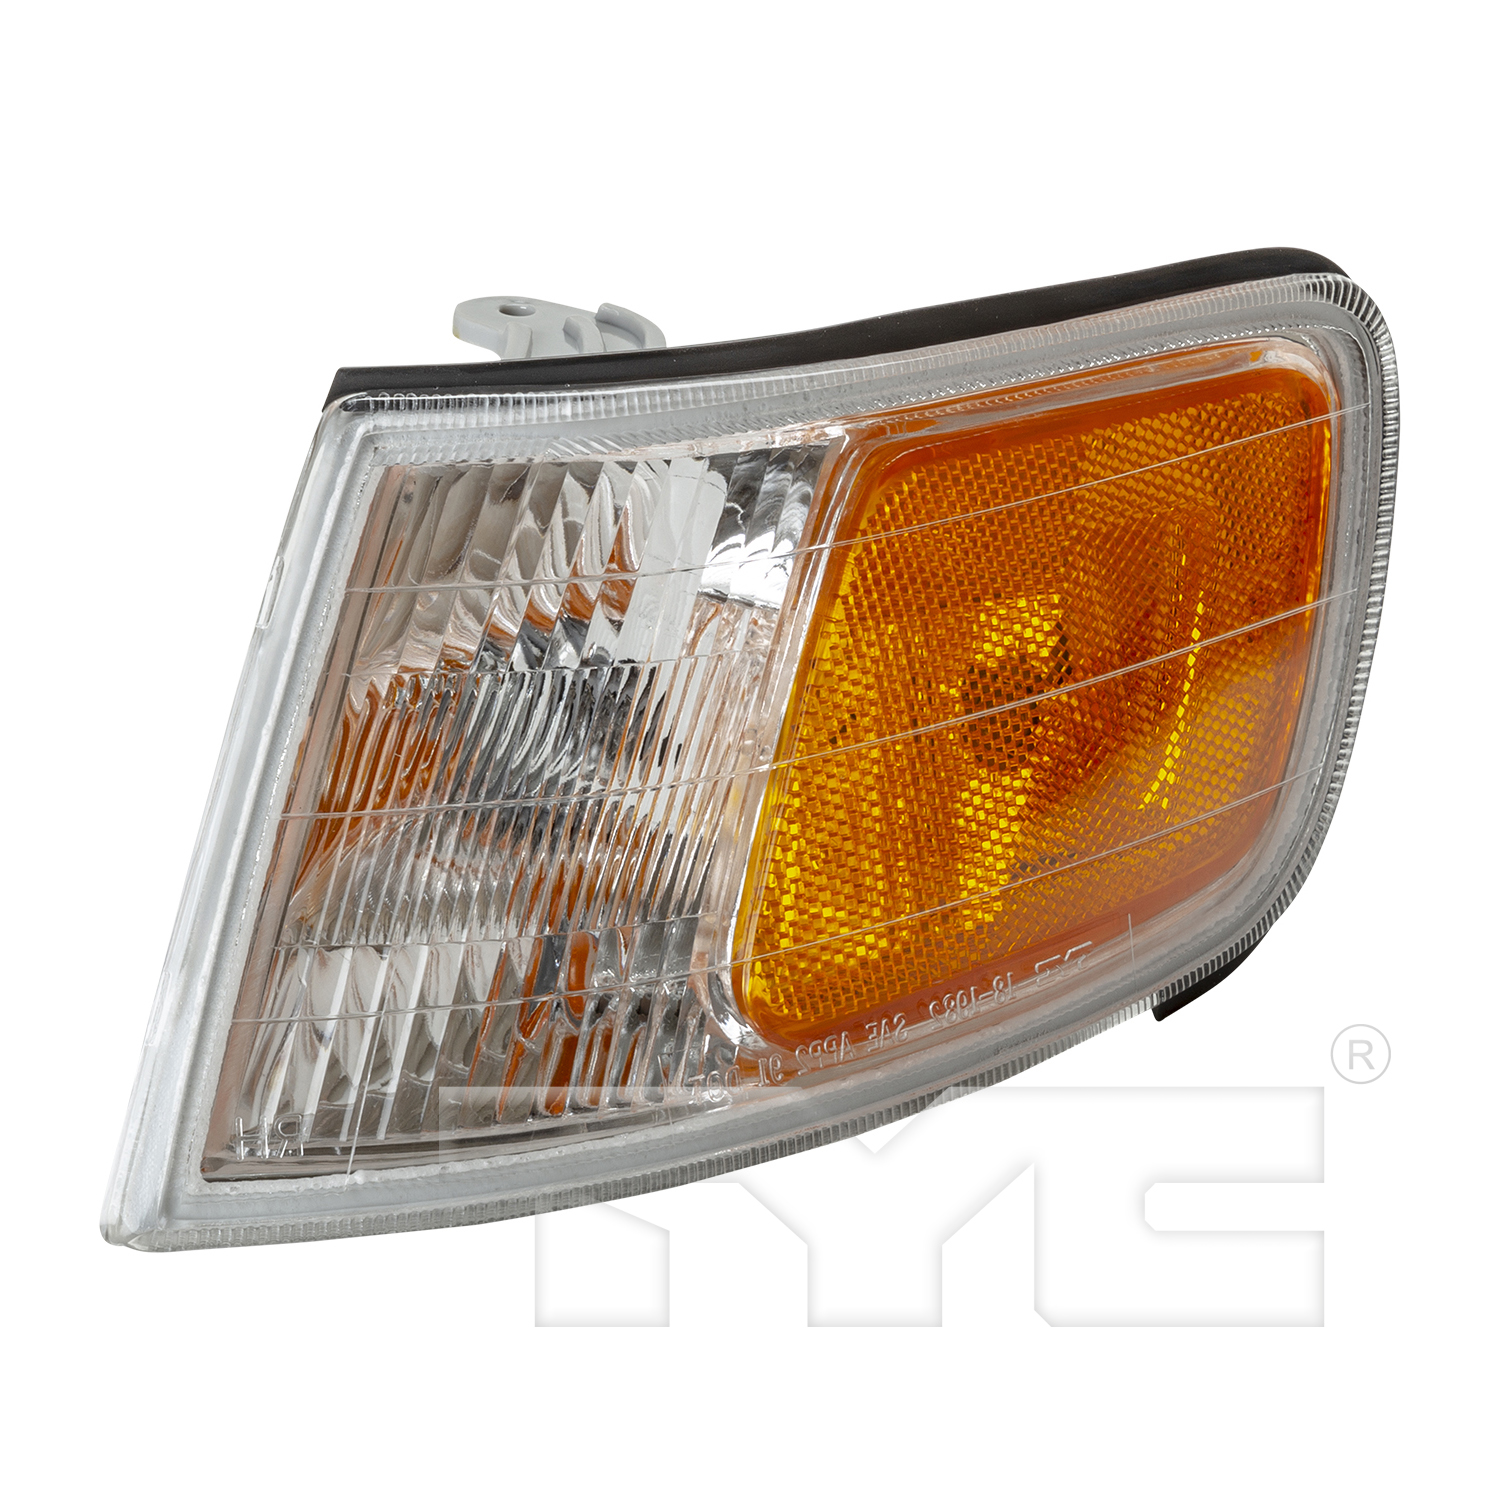 Aftermarket LAMPS for HONDA - ACCORD, ACCORD,94-97,LT Front marker lamp assy